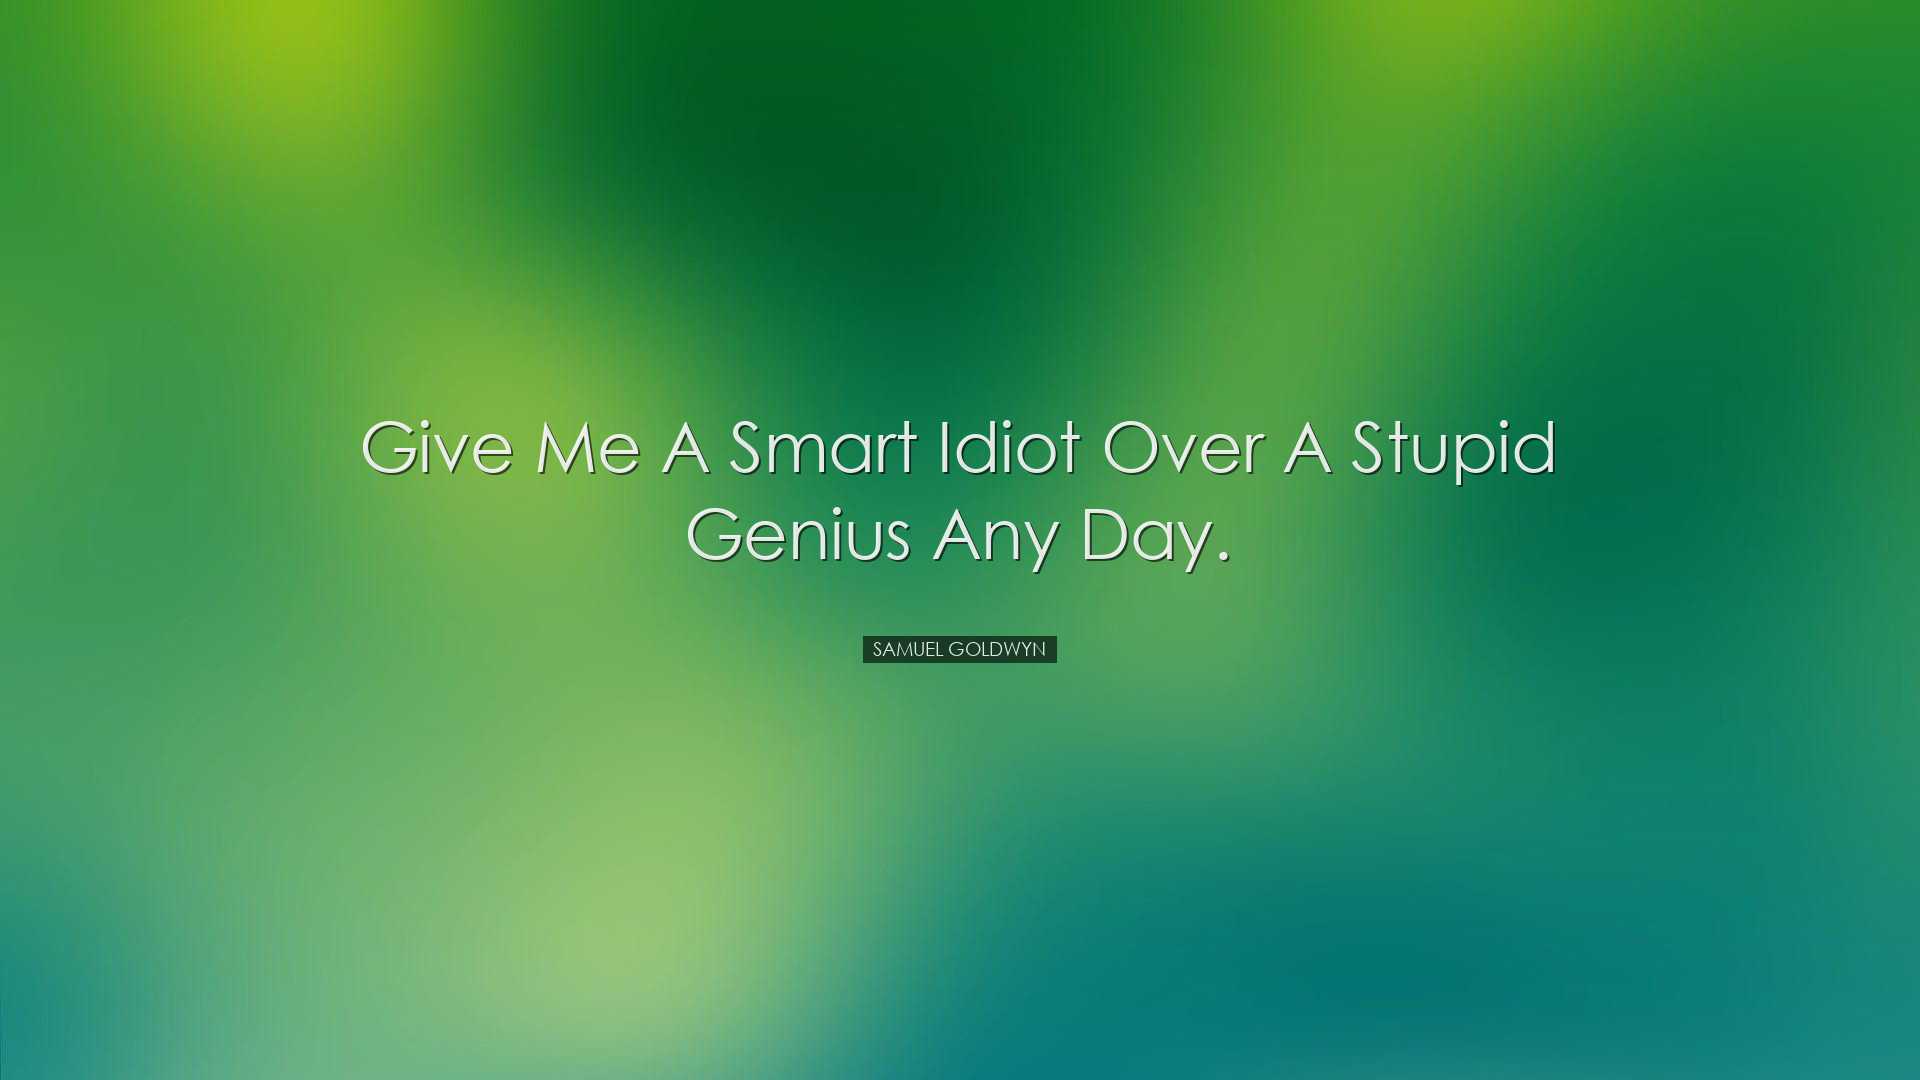 Give me a smart idiot over a stupid genius any day. - Samuel Goldw